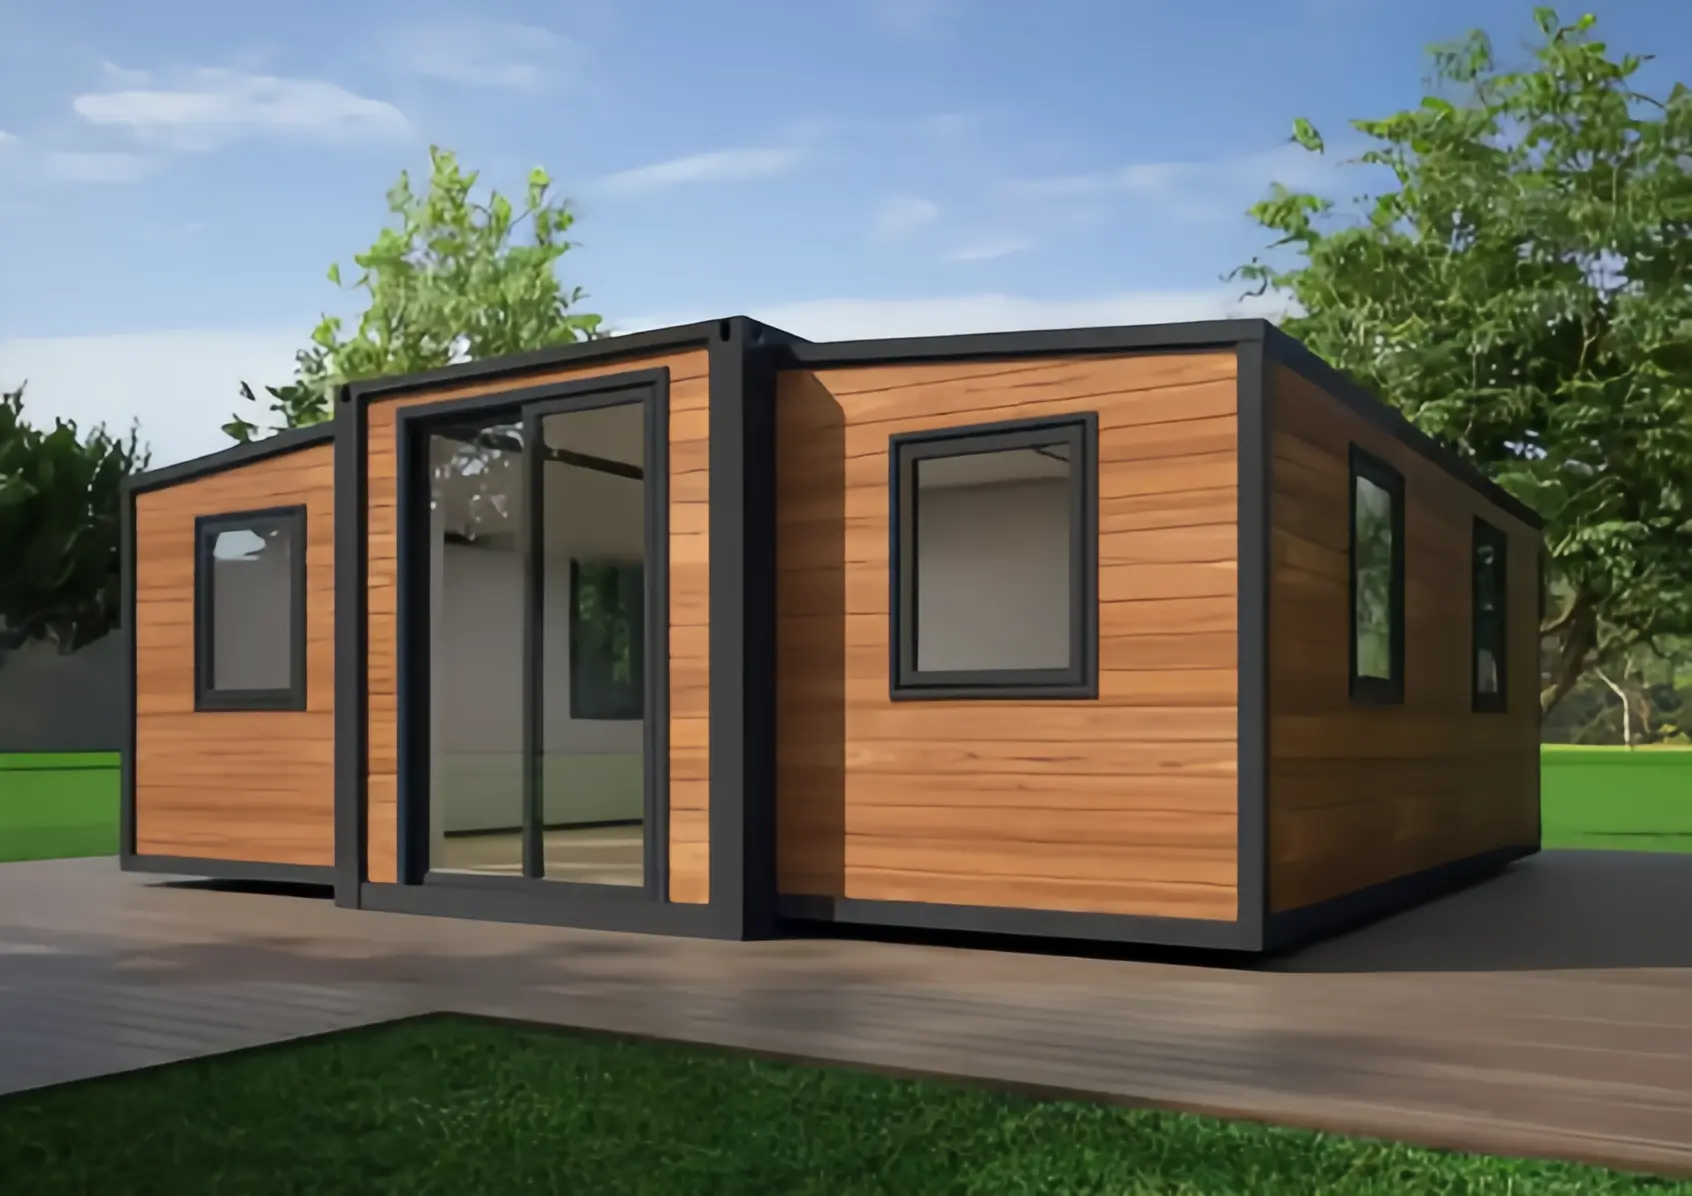 Whether you're a nature enthusiast, an urban dweller, or someone with an eye for design, container homes offer a remarkable and eco-conscious way of living, perfectly aligned with today's values and needs.